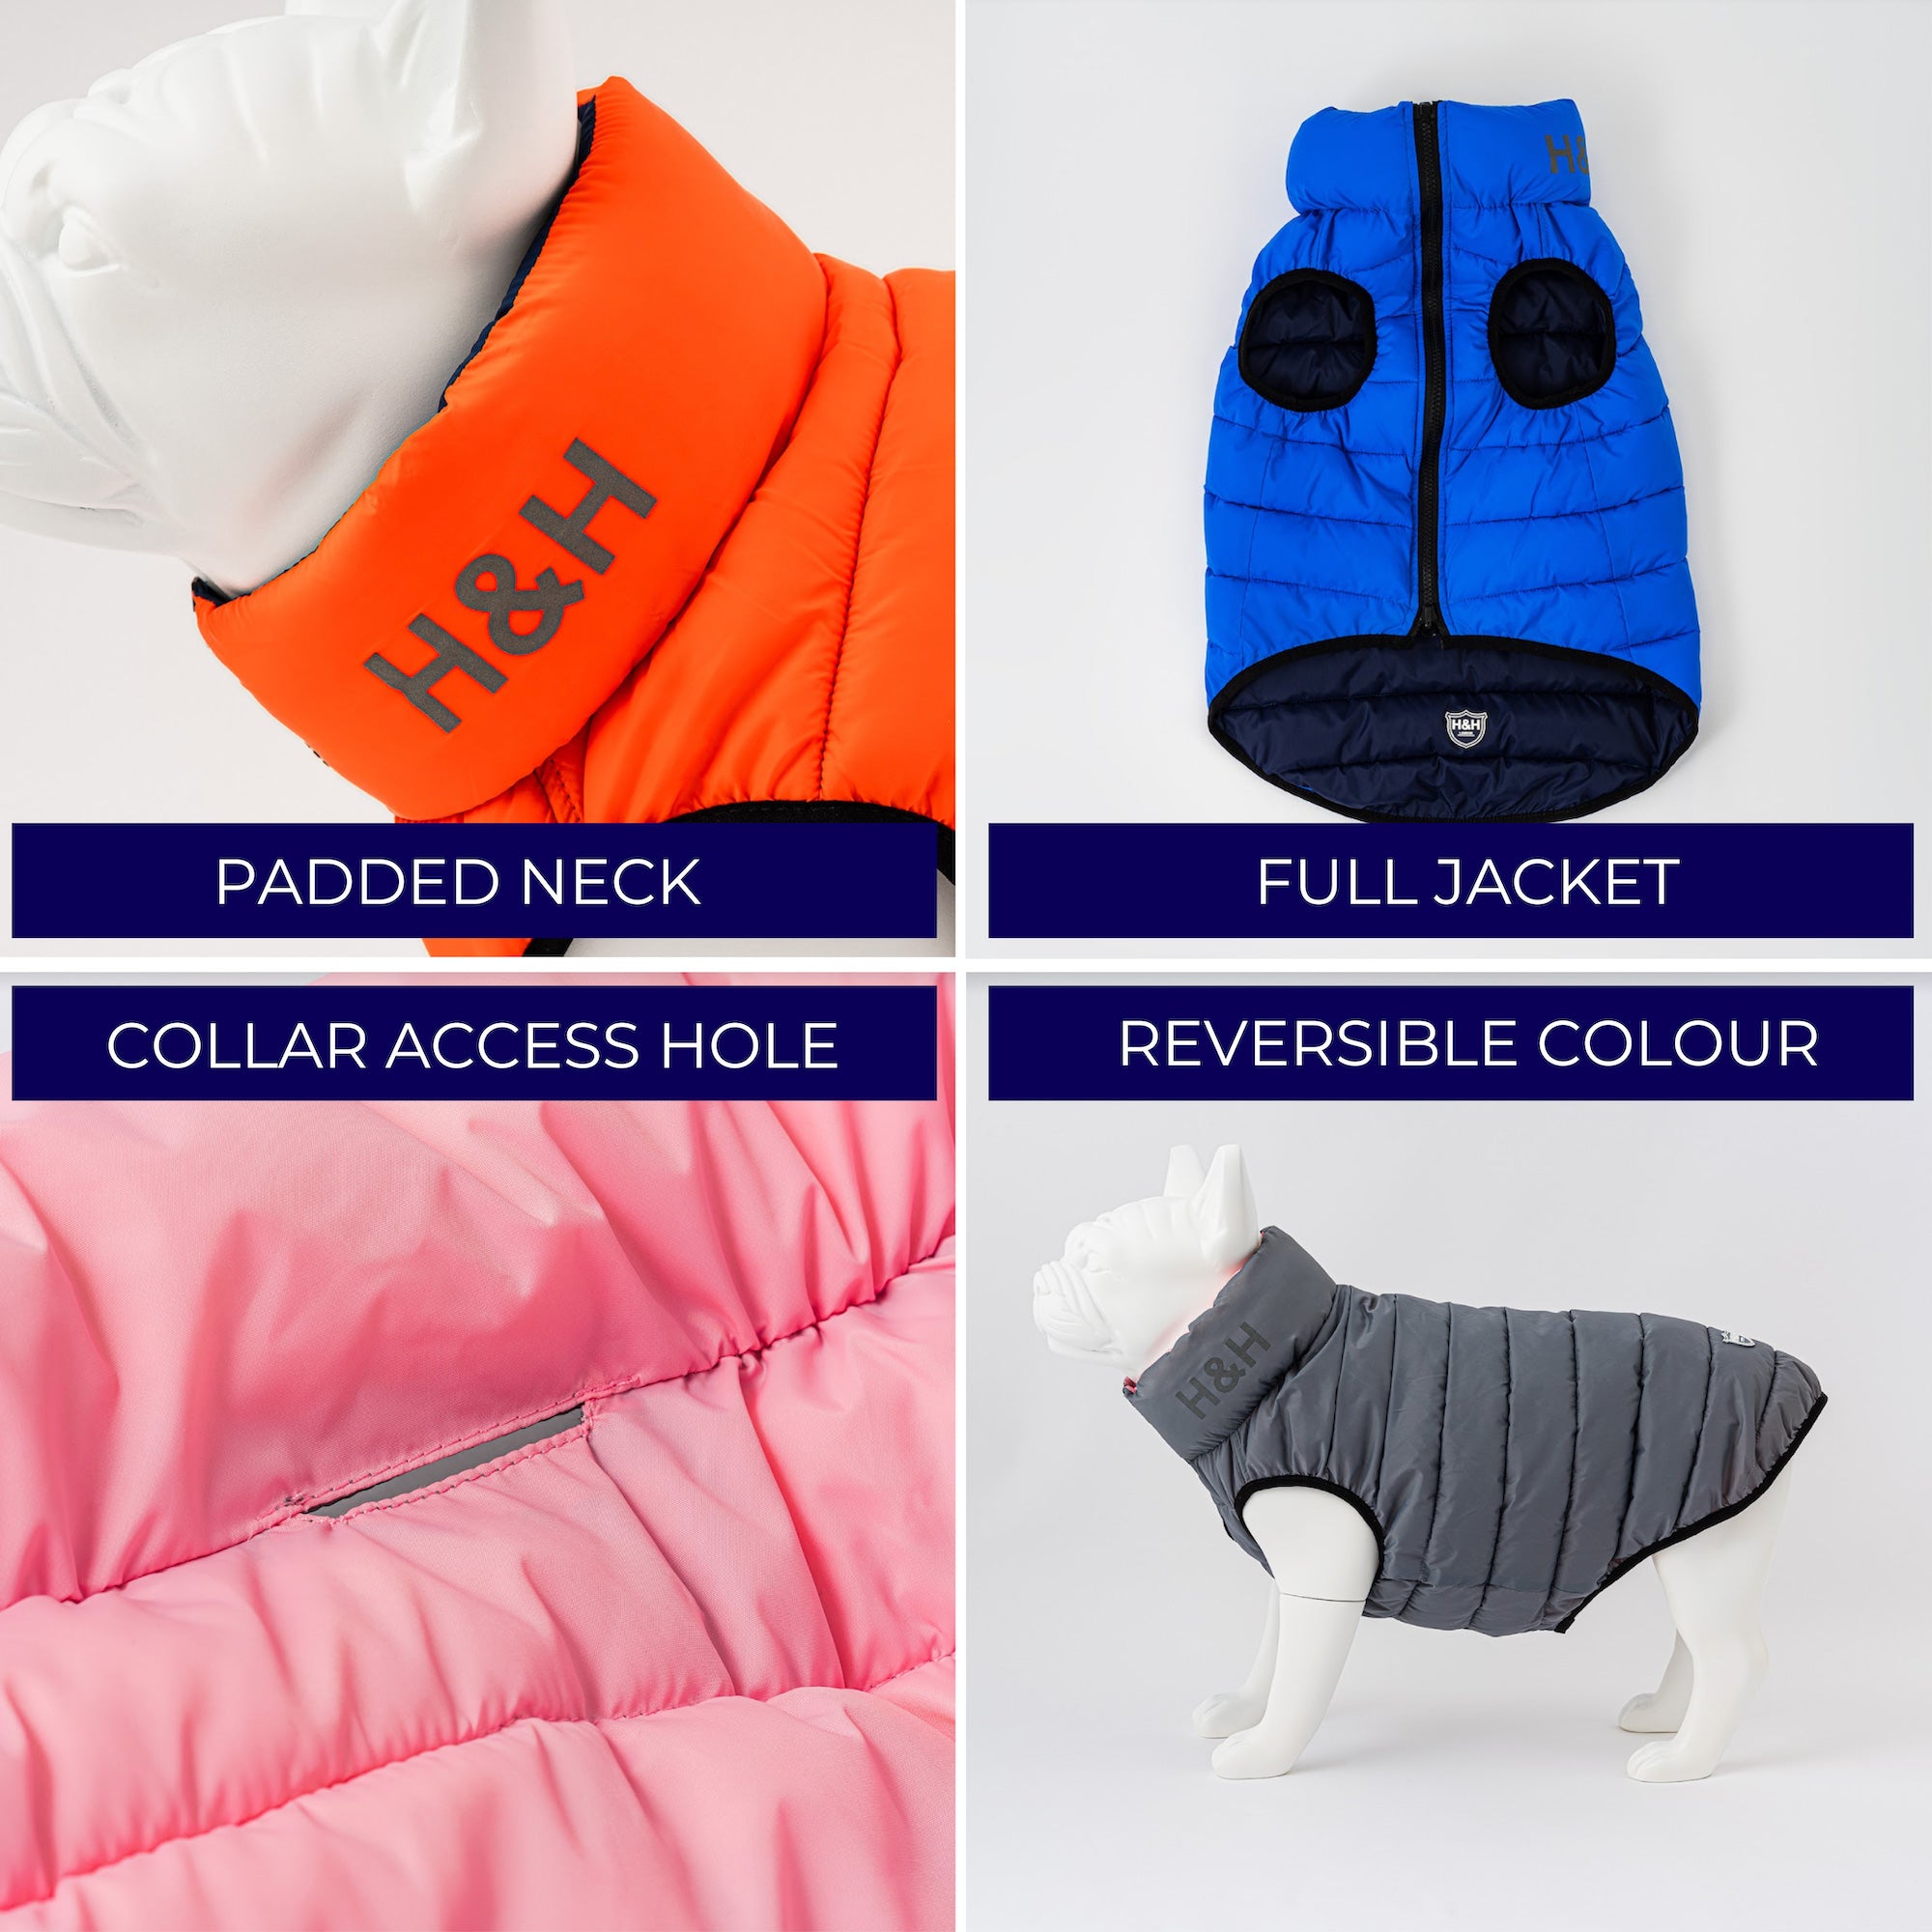 Puffer Jacket Key Features